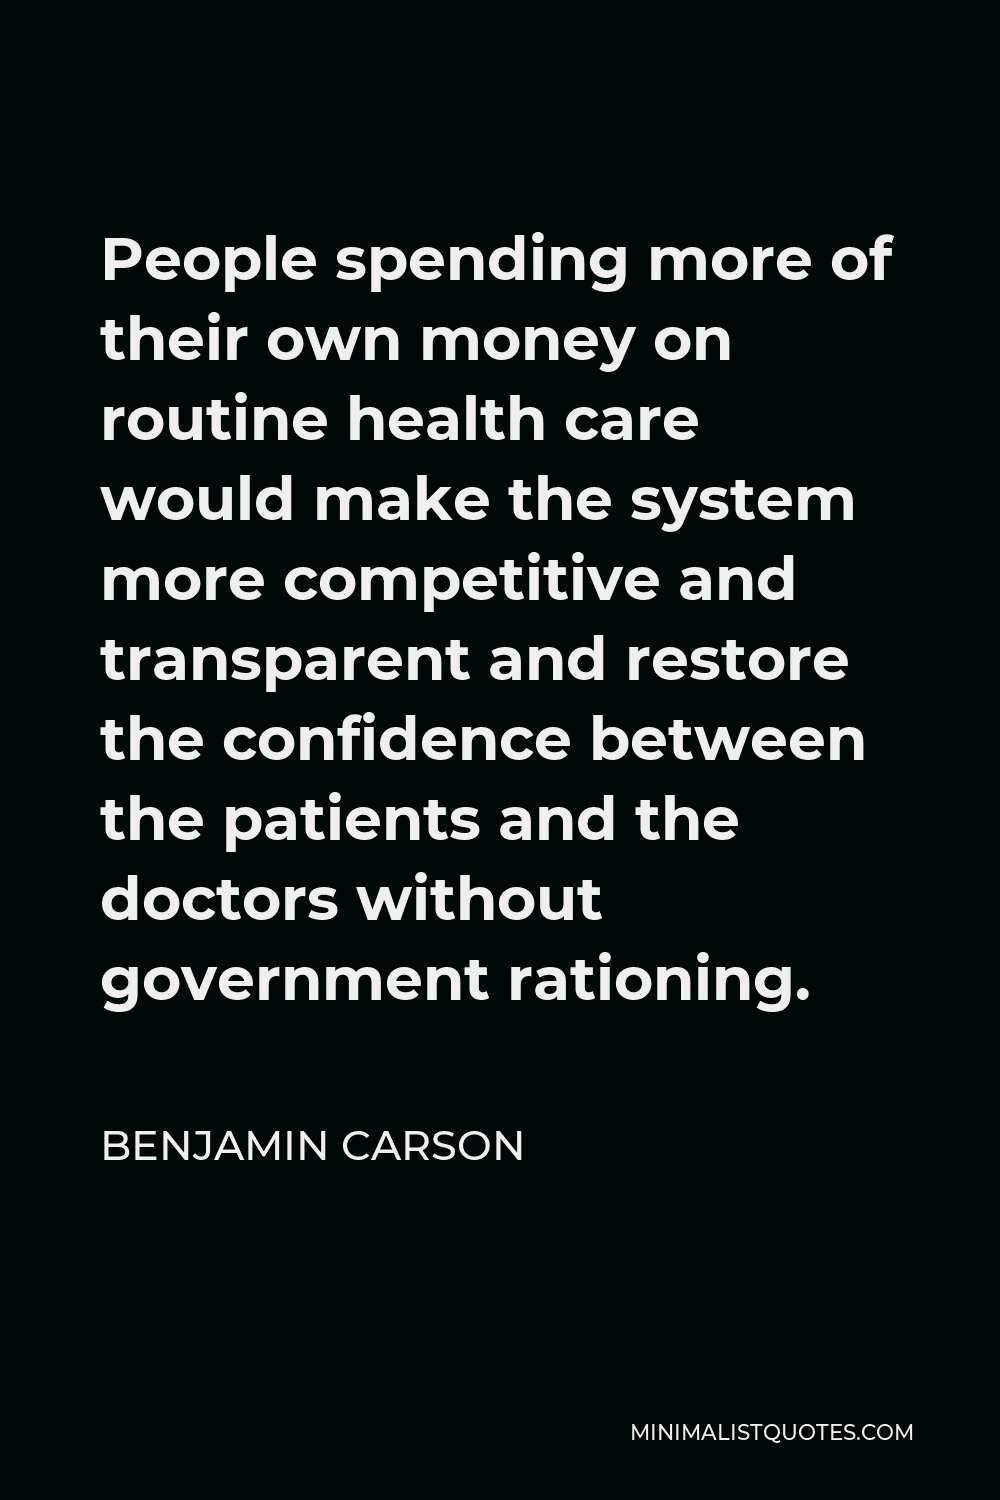 Benjamin Carson Quote - People spending more of their own money on routine health care would make the system more competitive and transparent and restore the confidence between the patients and the doctors without government rationing.